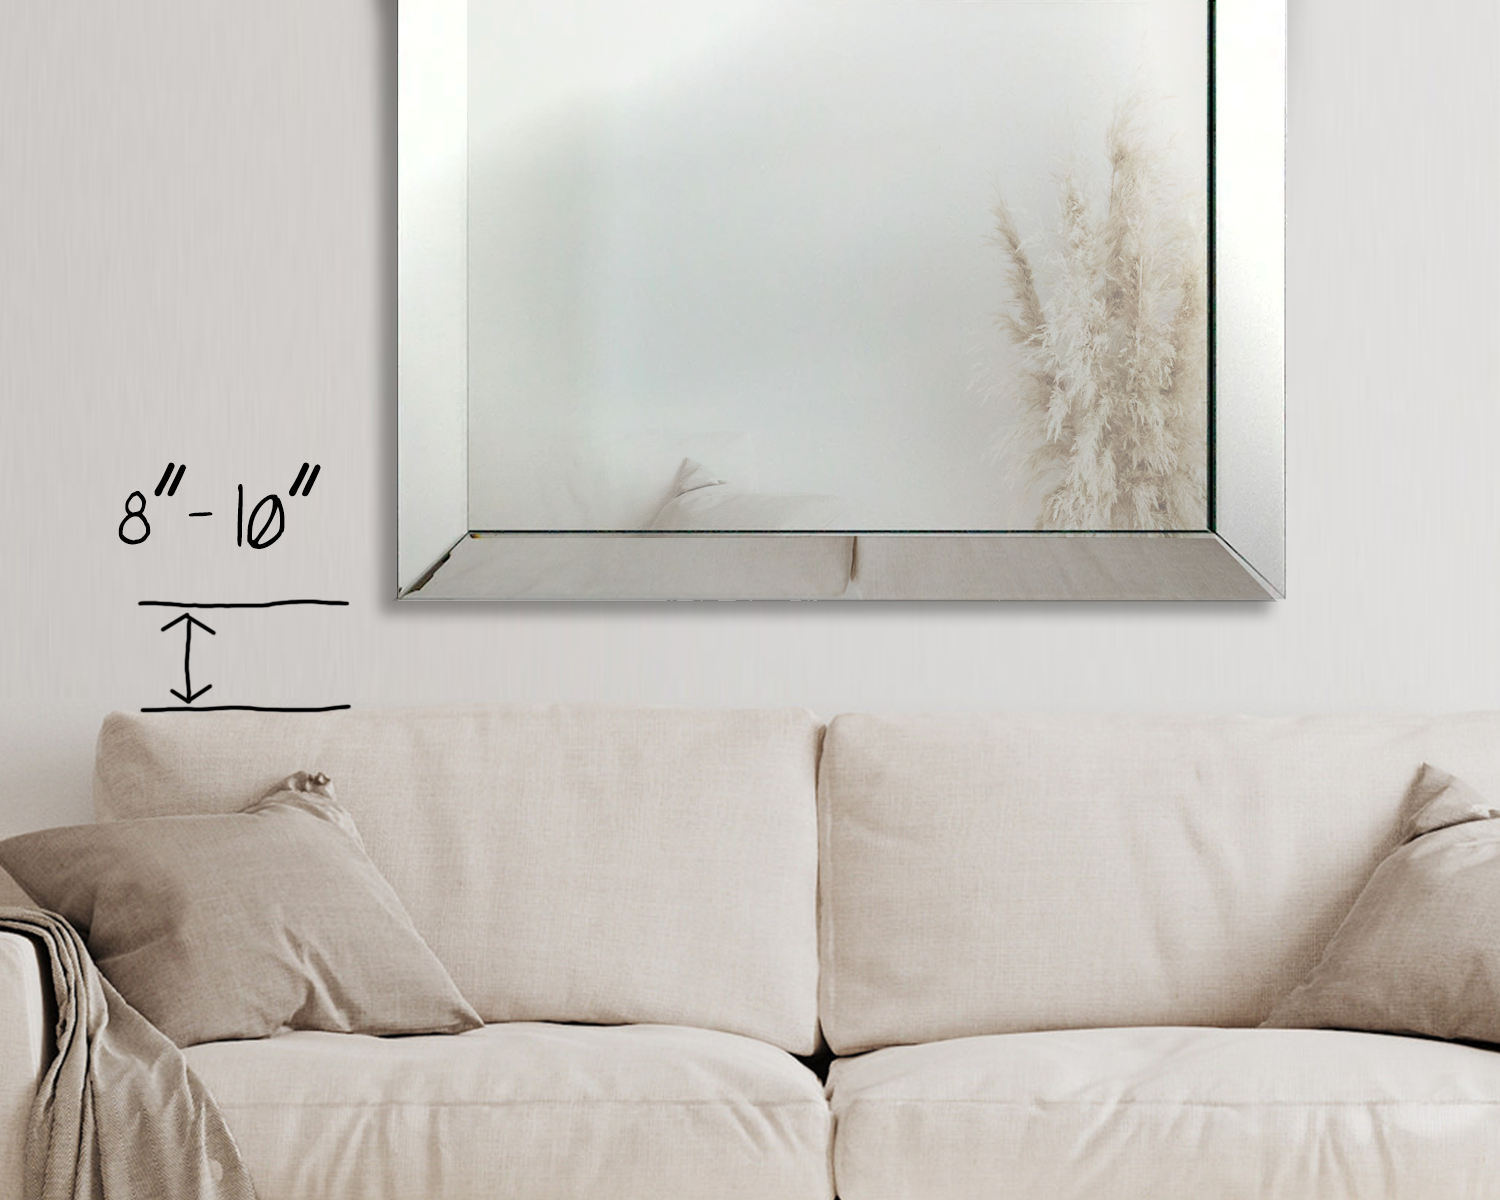 a picture of a large mirror hung above a couch showing to hang it 8 to 10 inches above the back of the couch